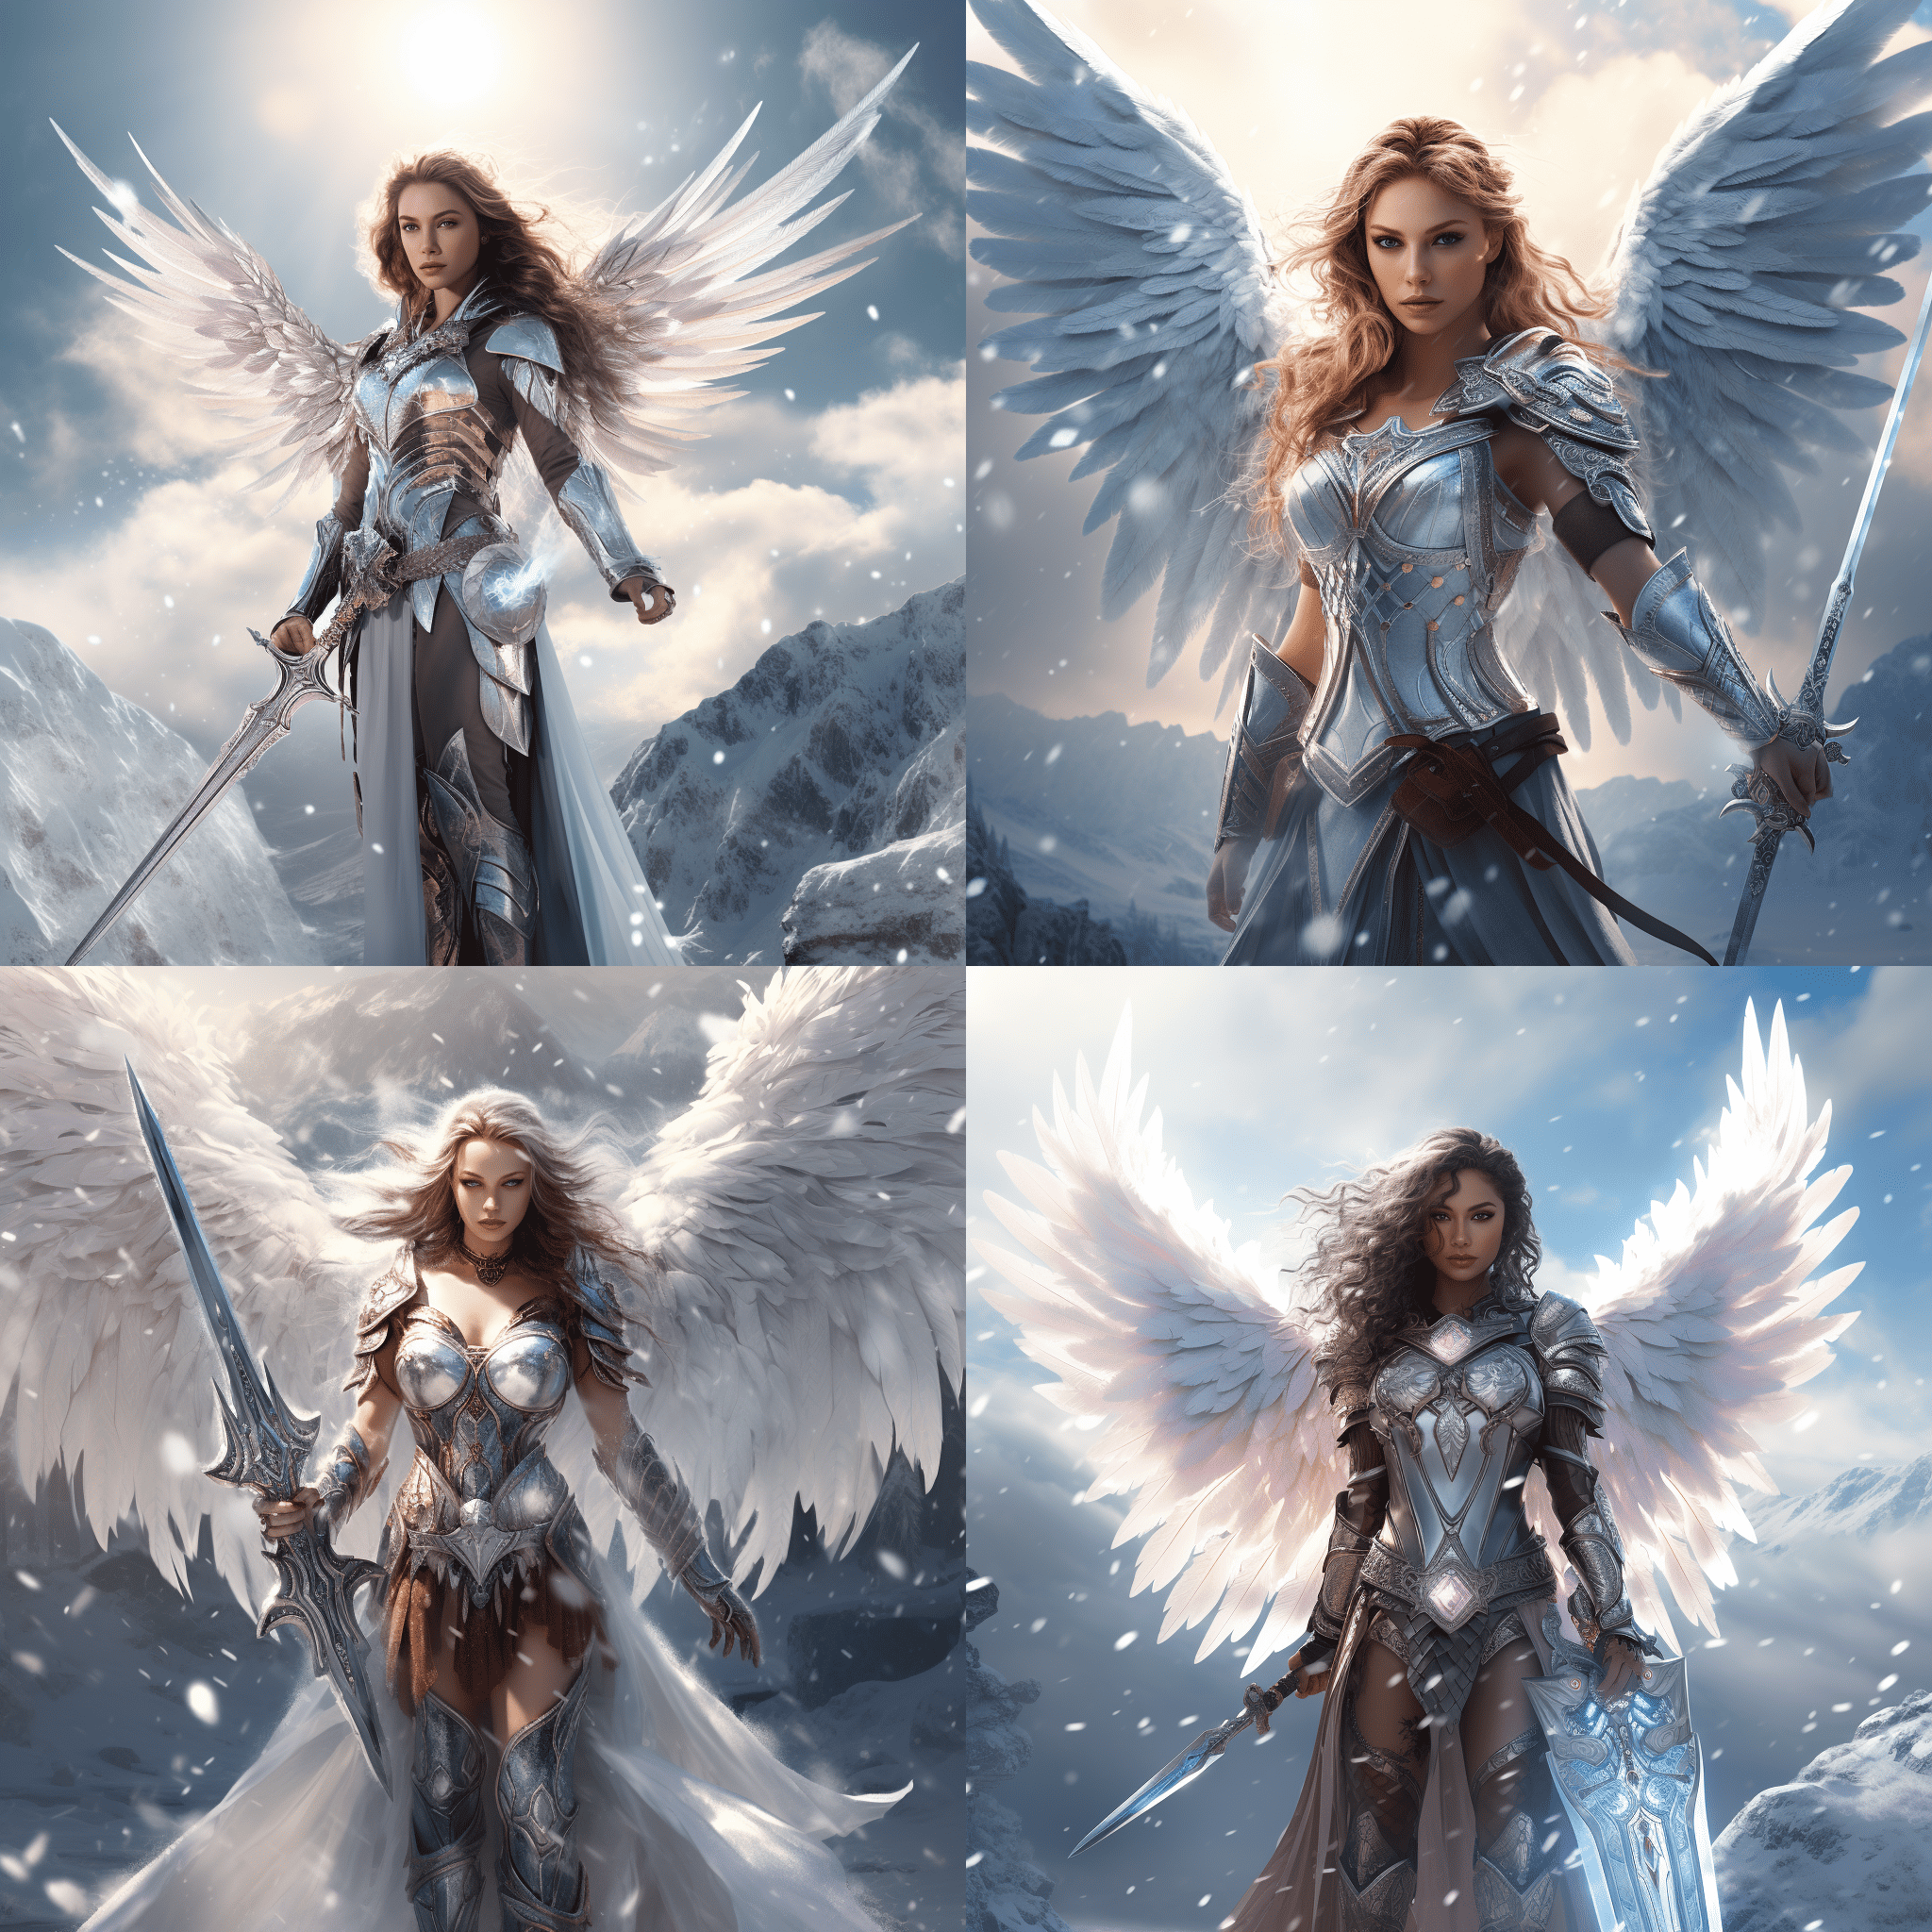 A warrior princess with shimmering armored wings, wielding a crystal-infused sword, standing on a snowy peak